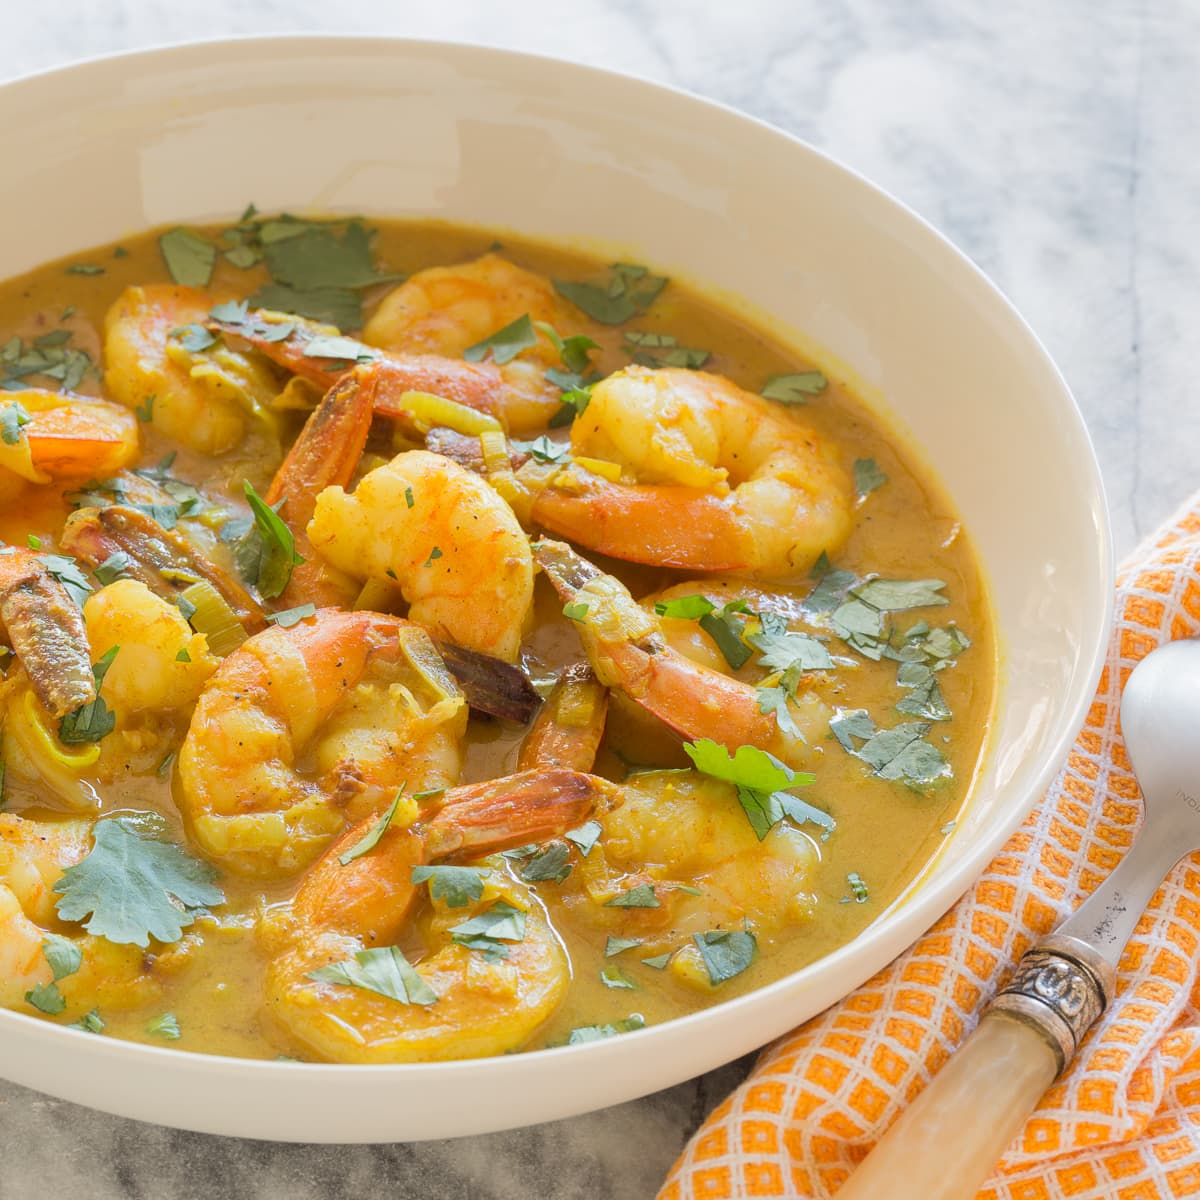 Orangey colored coconut curry shrimp in a bowl.